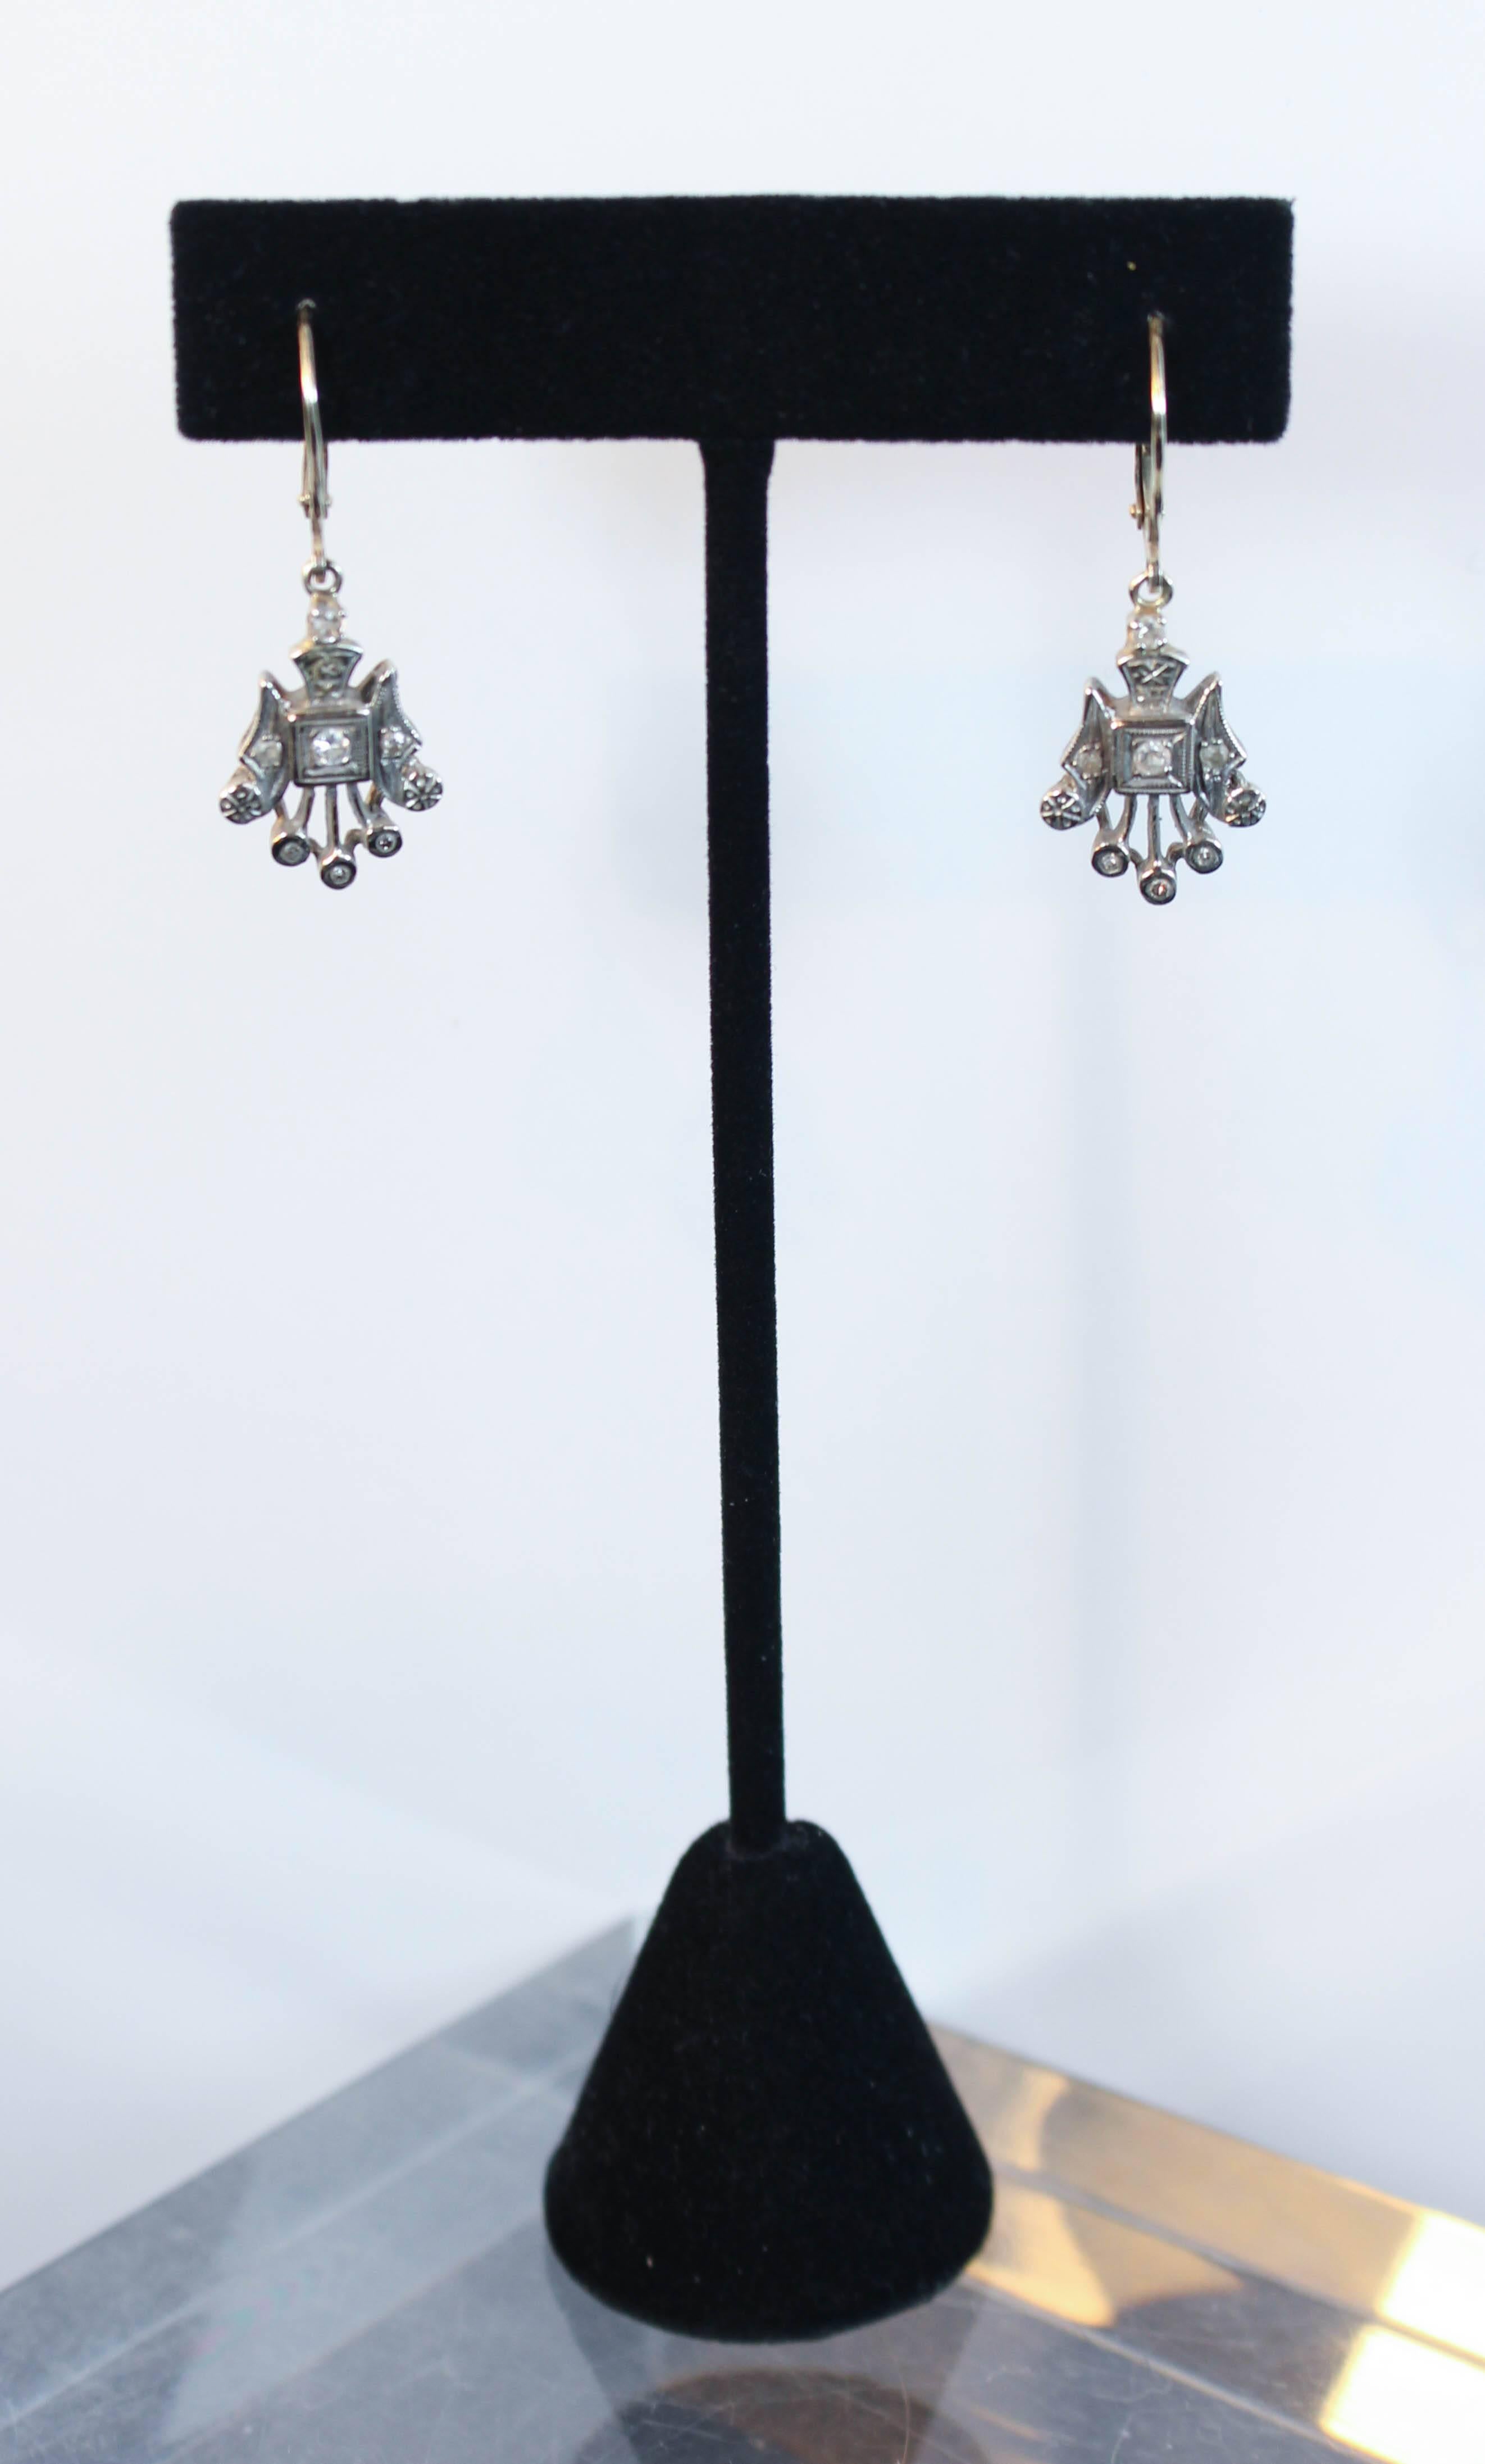 These earrings are composed of 14KT white gold with diamond accents. Features a dangle style closure. In excellent condition.

Please feel free to ask any questions you may have, we are happy to assist. 

Specs:
14KT White Gold
Diamonds Approximate